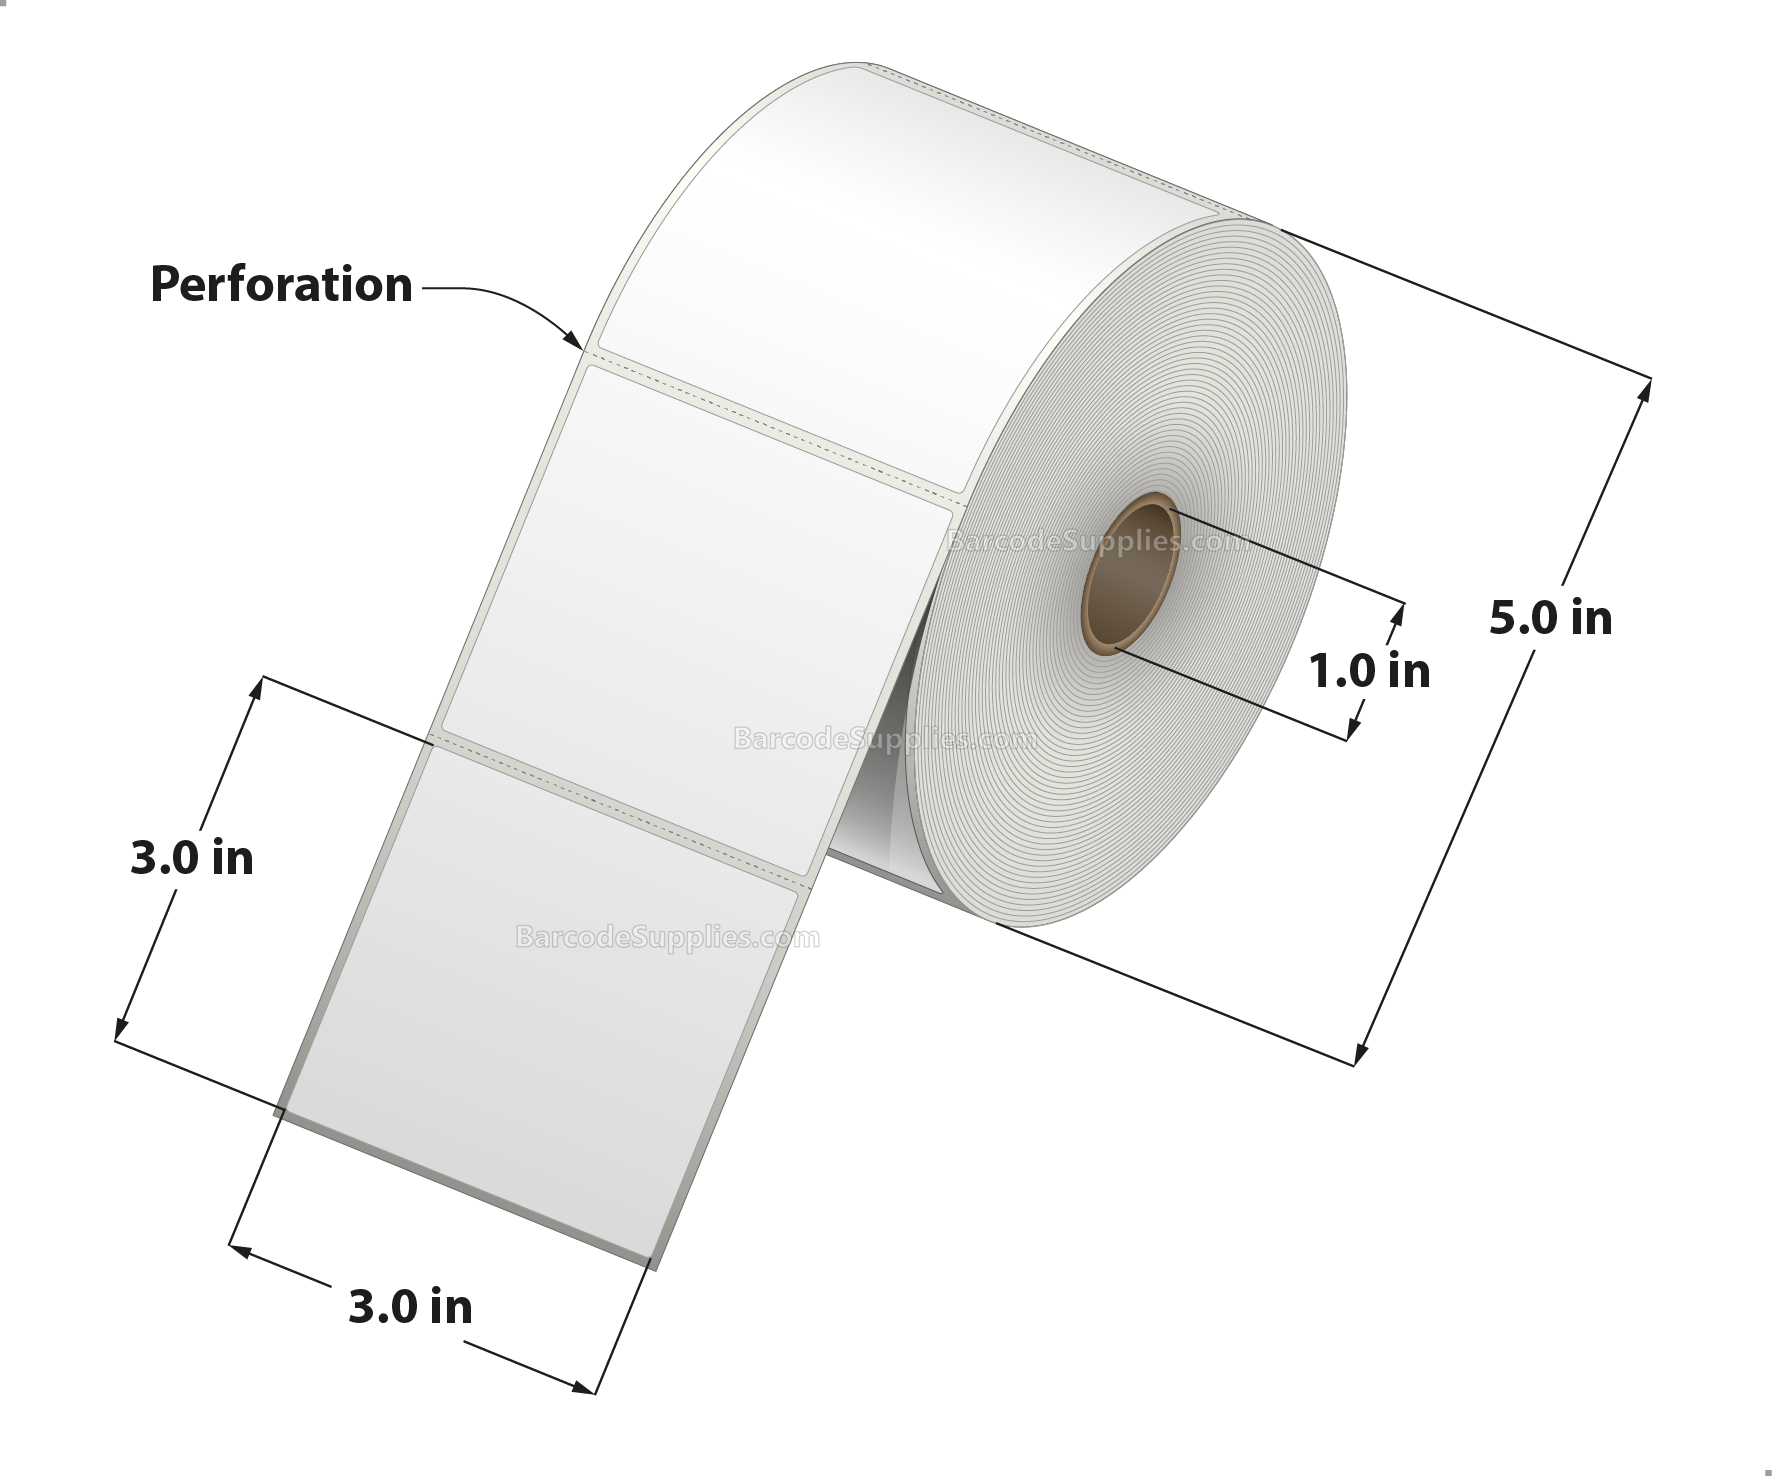 3 x 3 Direct Thermal White Labels With Permanent Acrylic Adhesive - Perforated - 850 Labels Per Roll - Carton Of 4 Rolls - 3400 Labels Total - MPN: DT33-15PDT